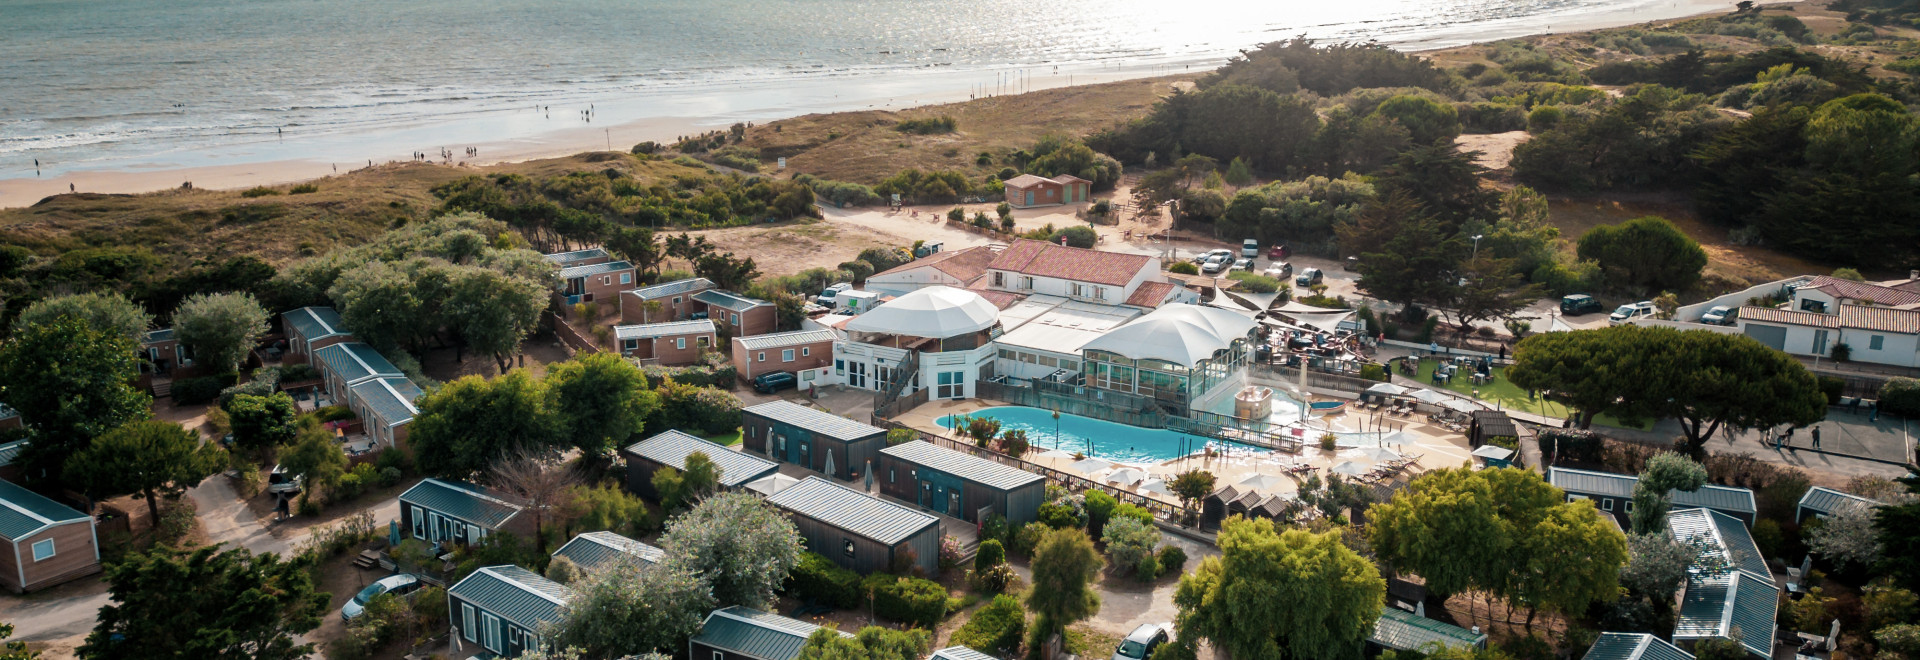 Aerial view of the 5-star campsite at Bois Plage in Ré near the ocean